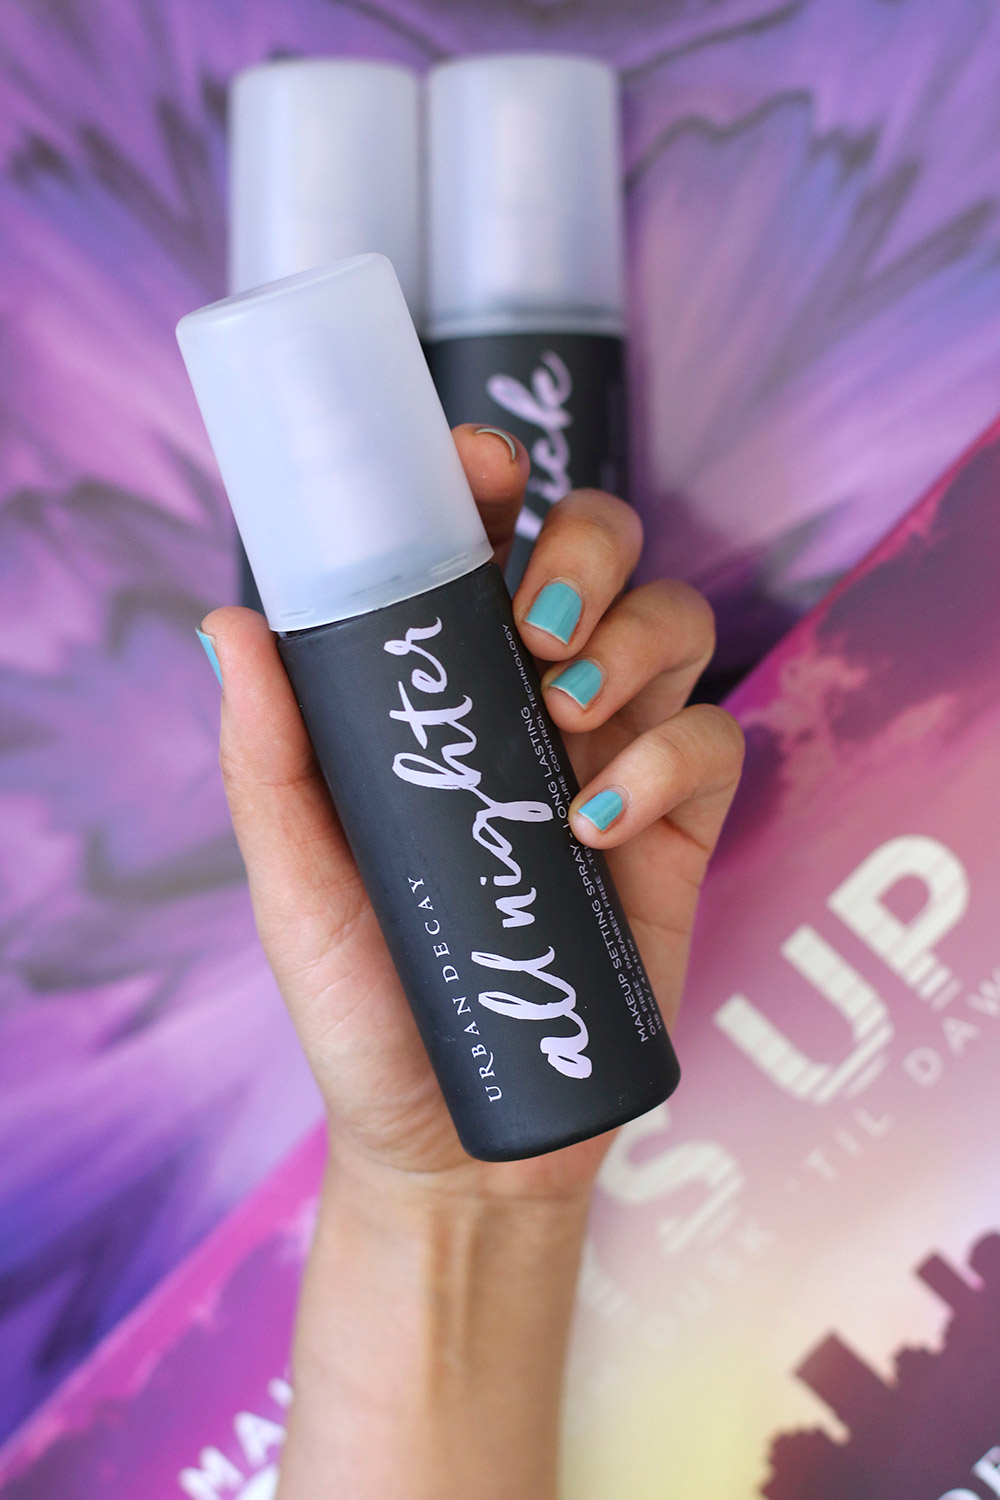 My fave Urban Decay All night Spray has a new outfit!